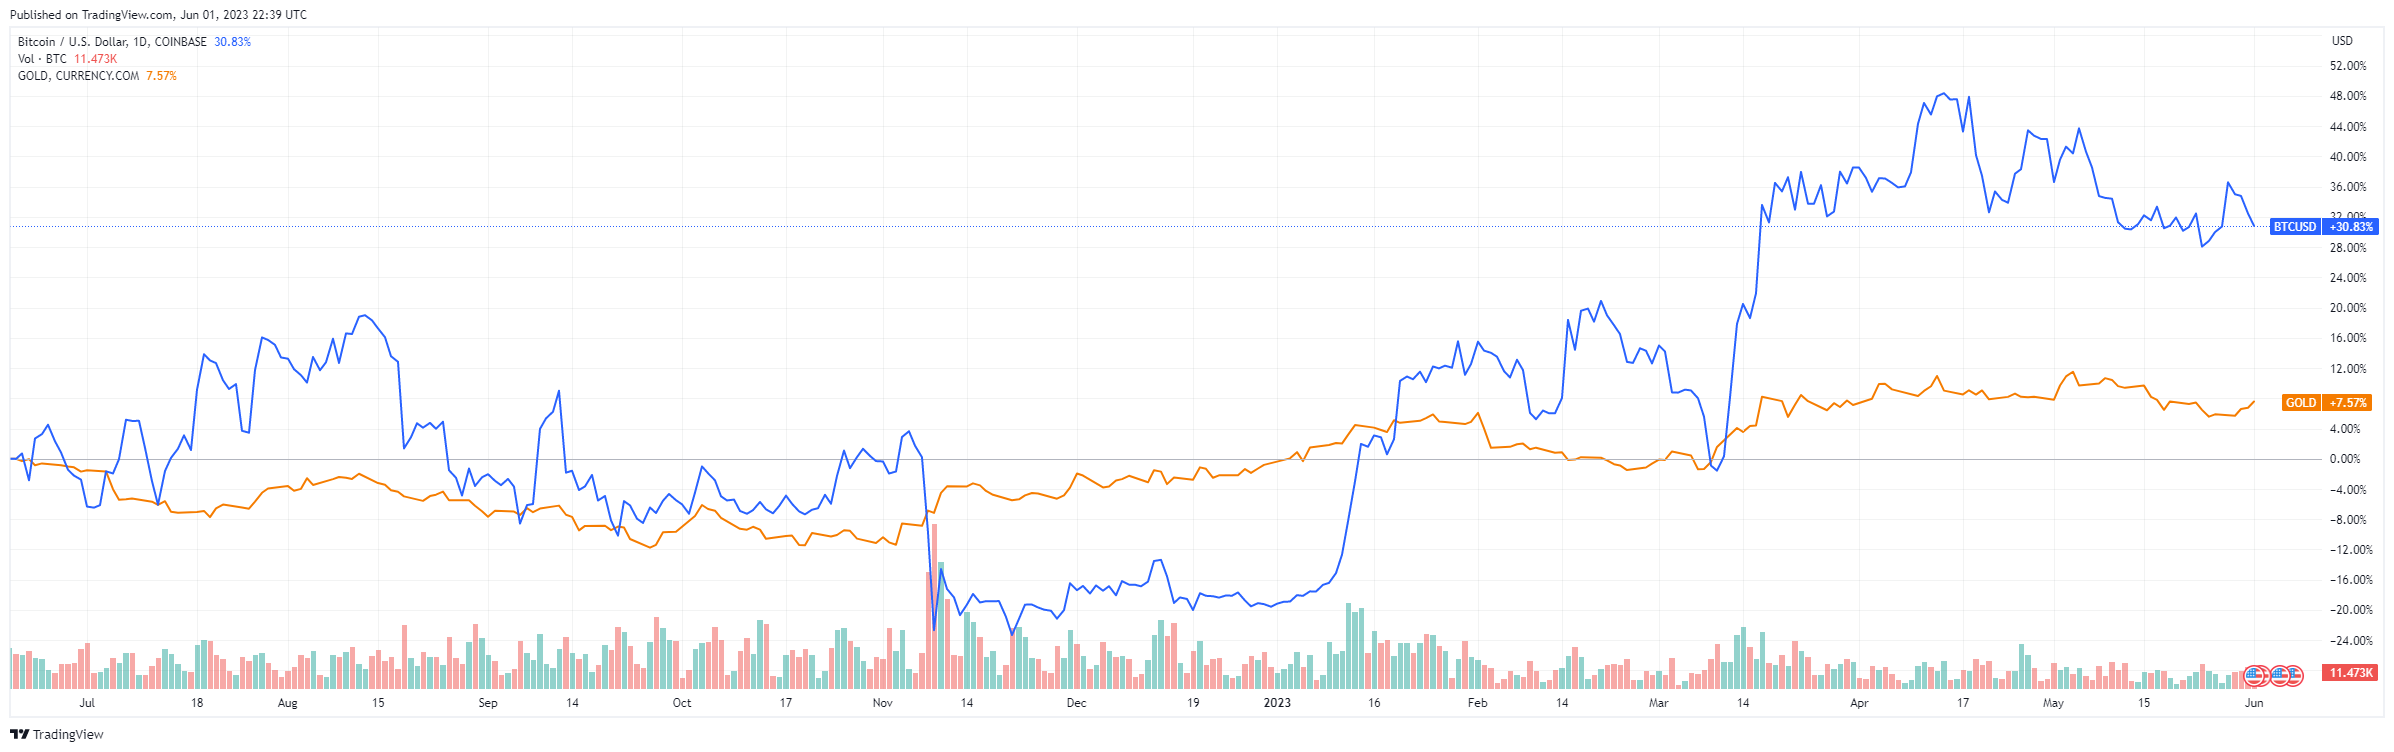 Line graph showing the price movement of bitcoin and gold